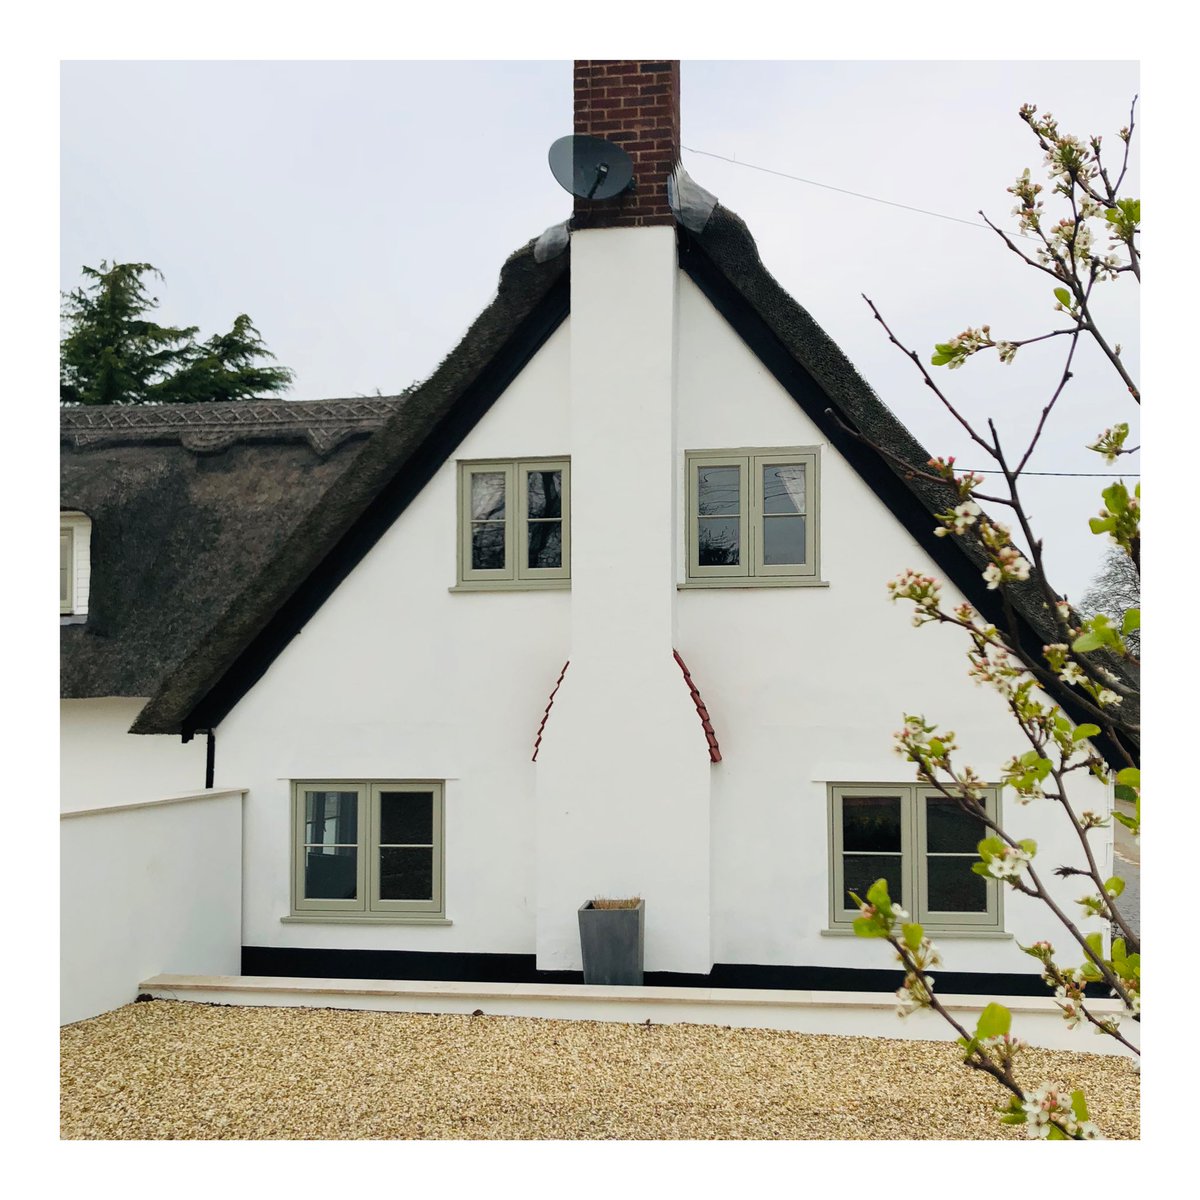 Only half the windows we install are white. Often white is the perfect choice, however selecting a different window colour can really enhance your home. The house shown has our French grey timber windows; the contrast against the off white render a great example.